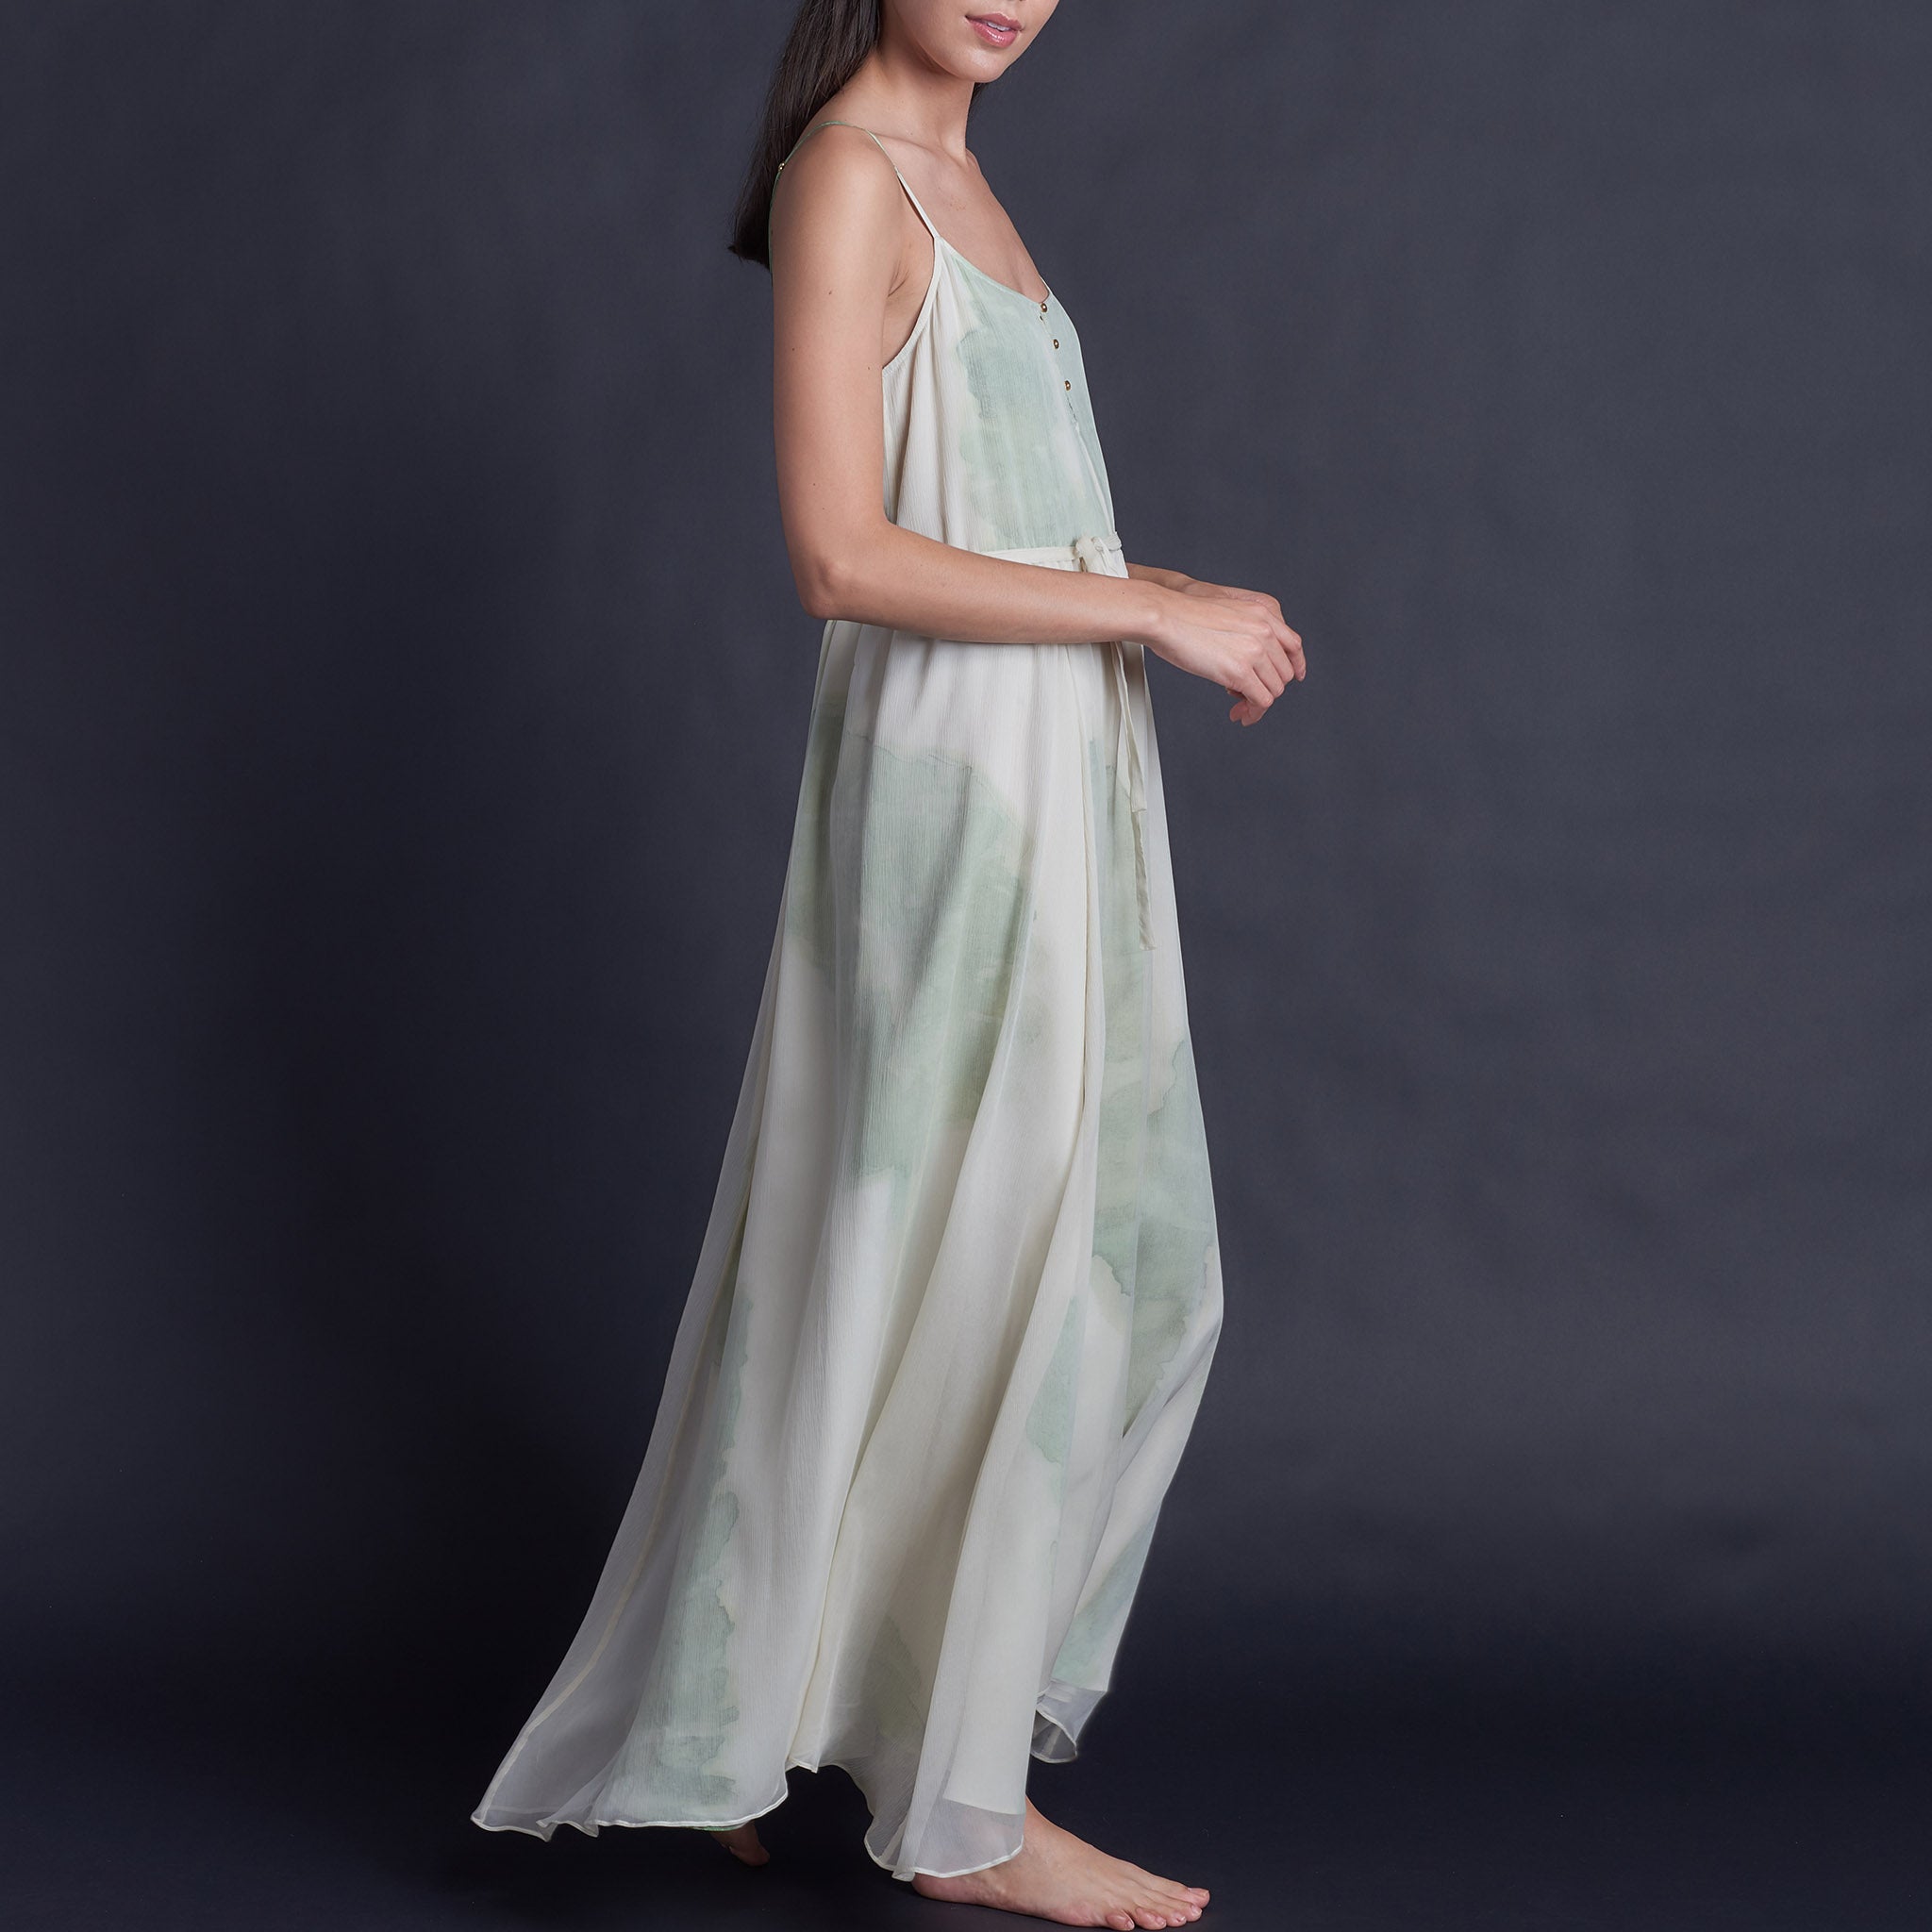 One of a Kind Antheia Slip Dress in Hand Painted Silk Crepe de Chine